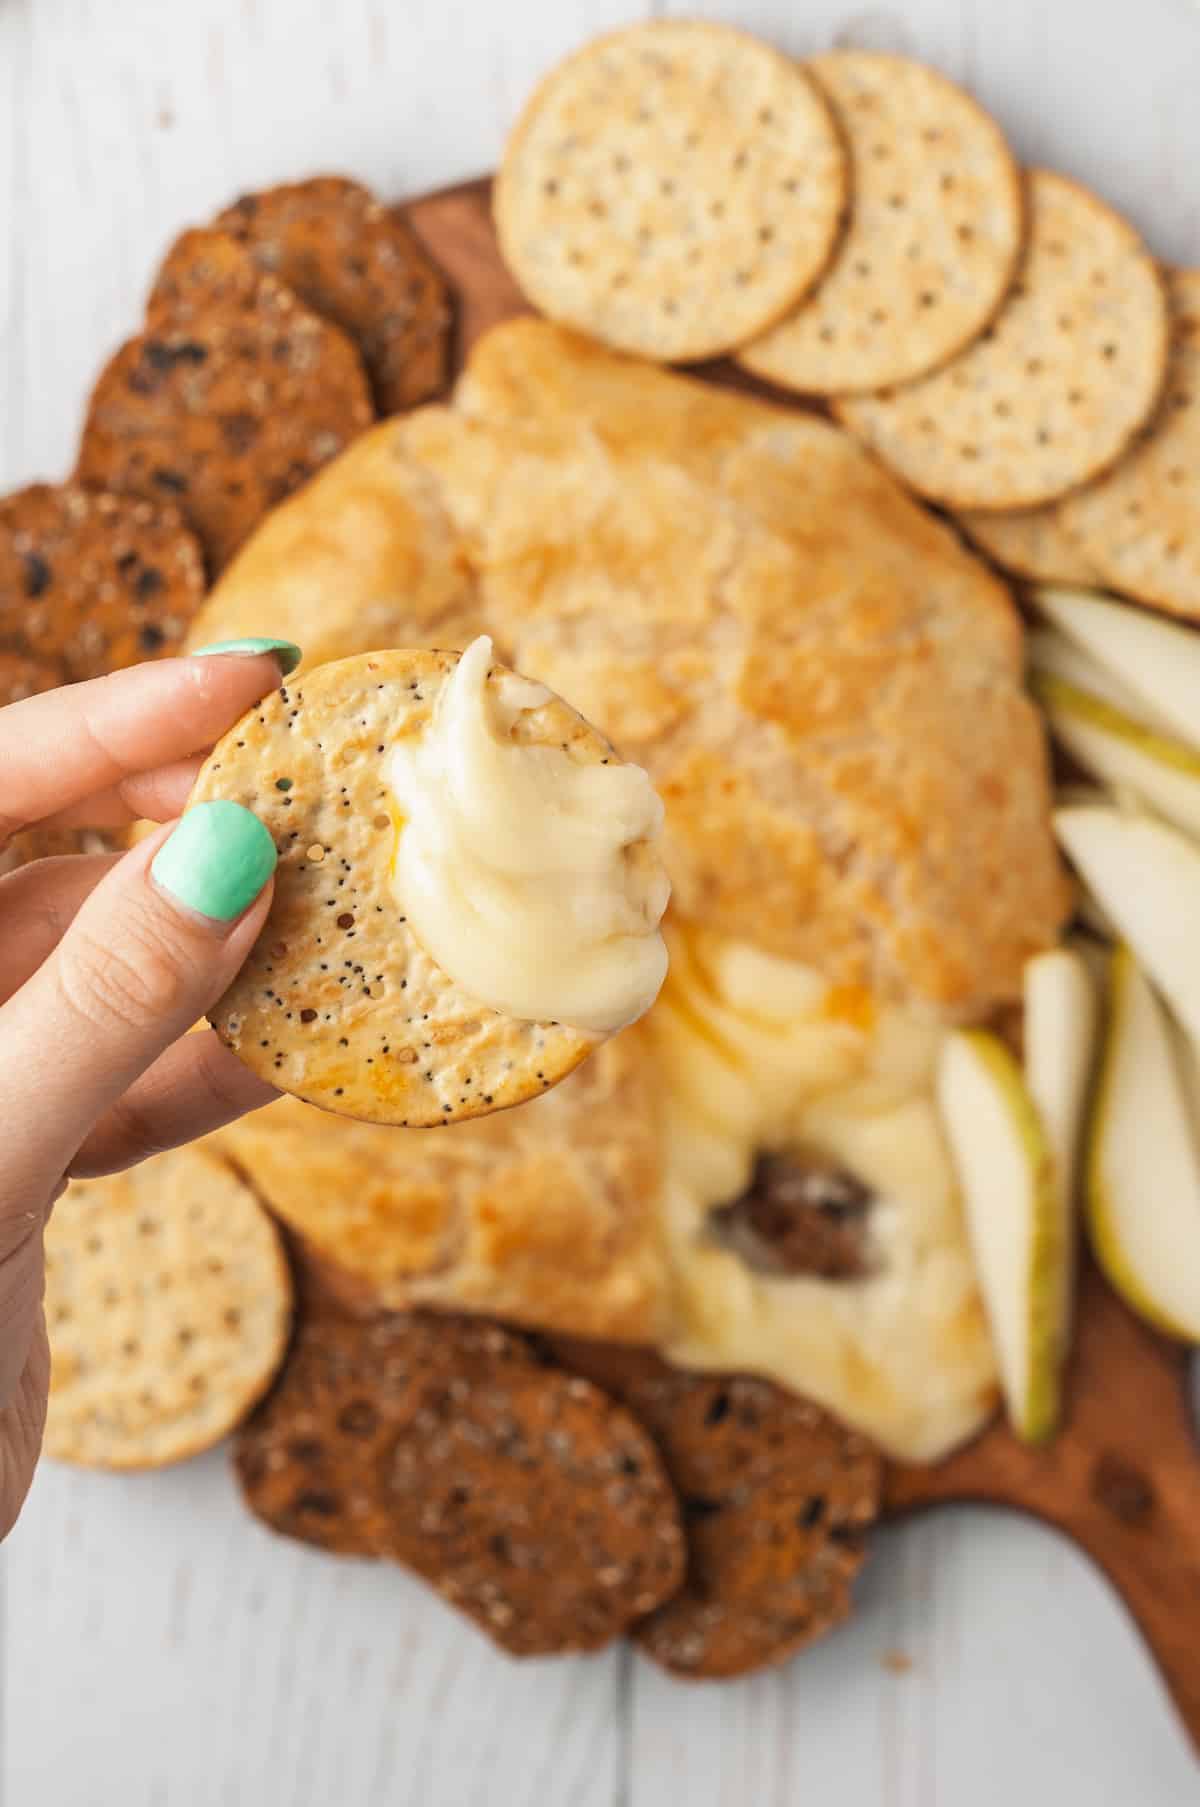 Hand holding cracker dipped into baked brie